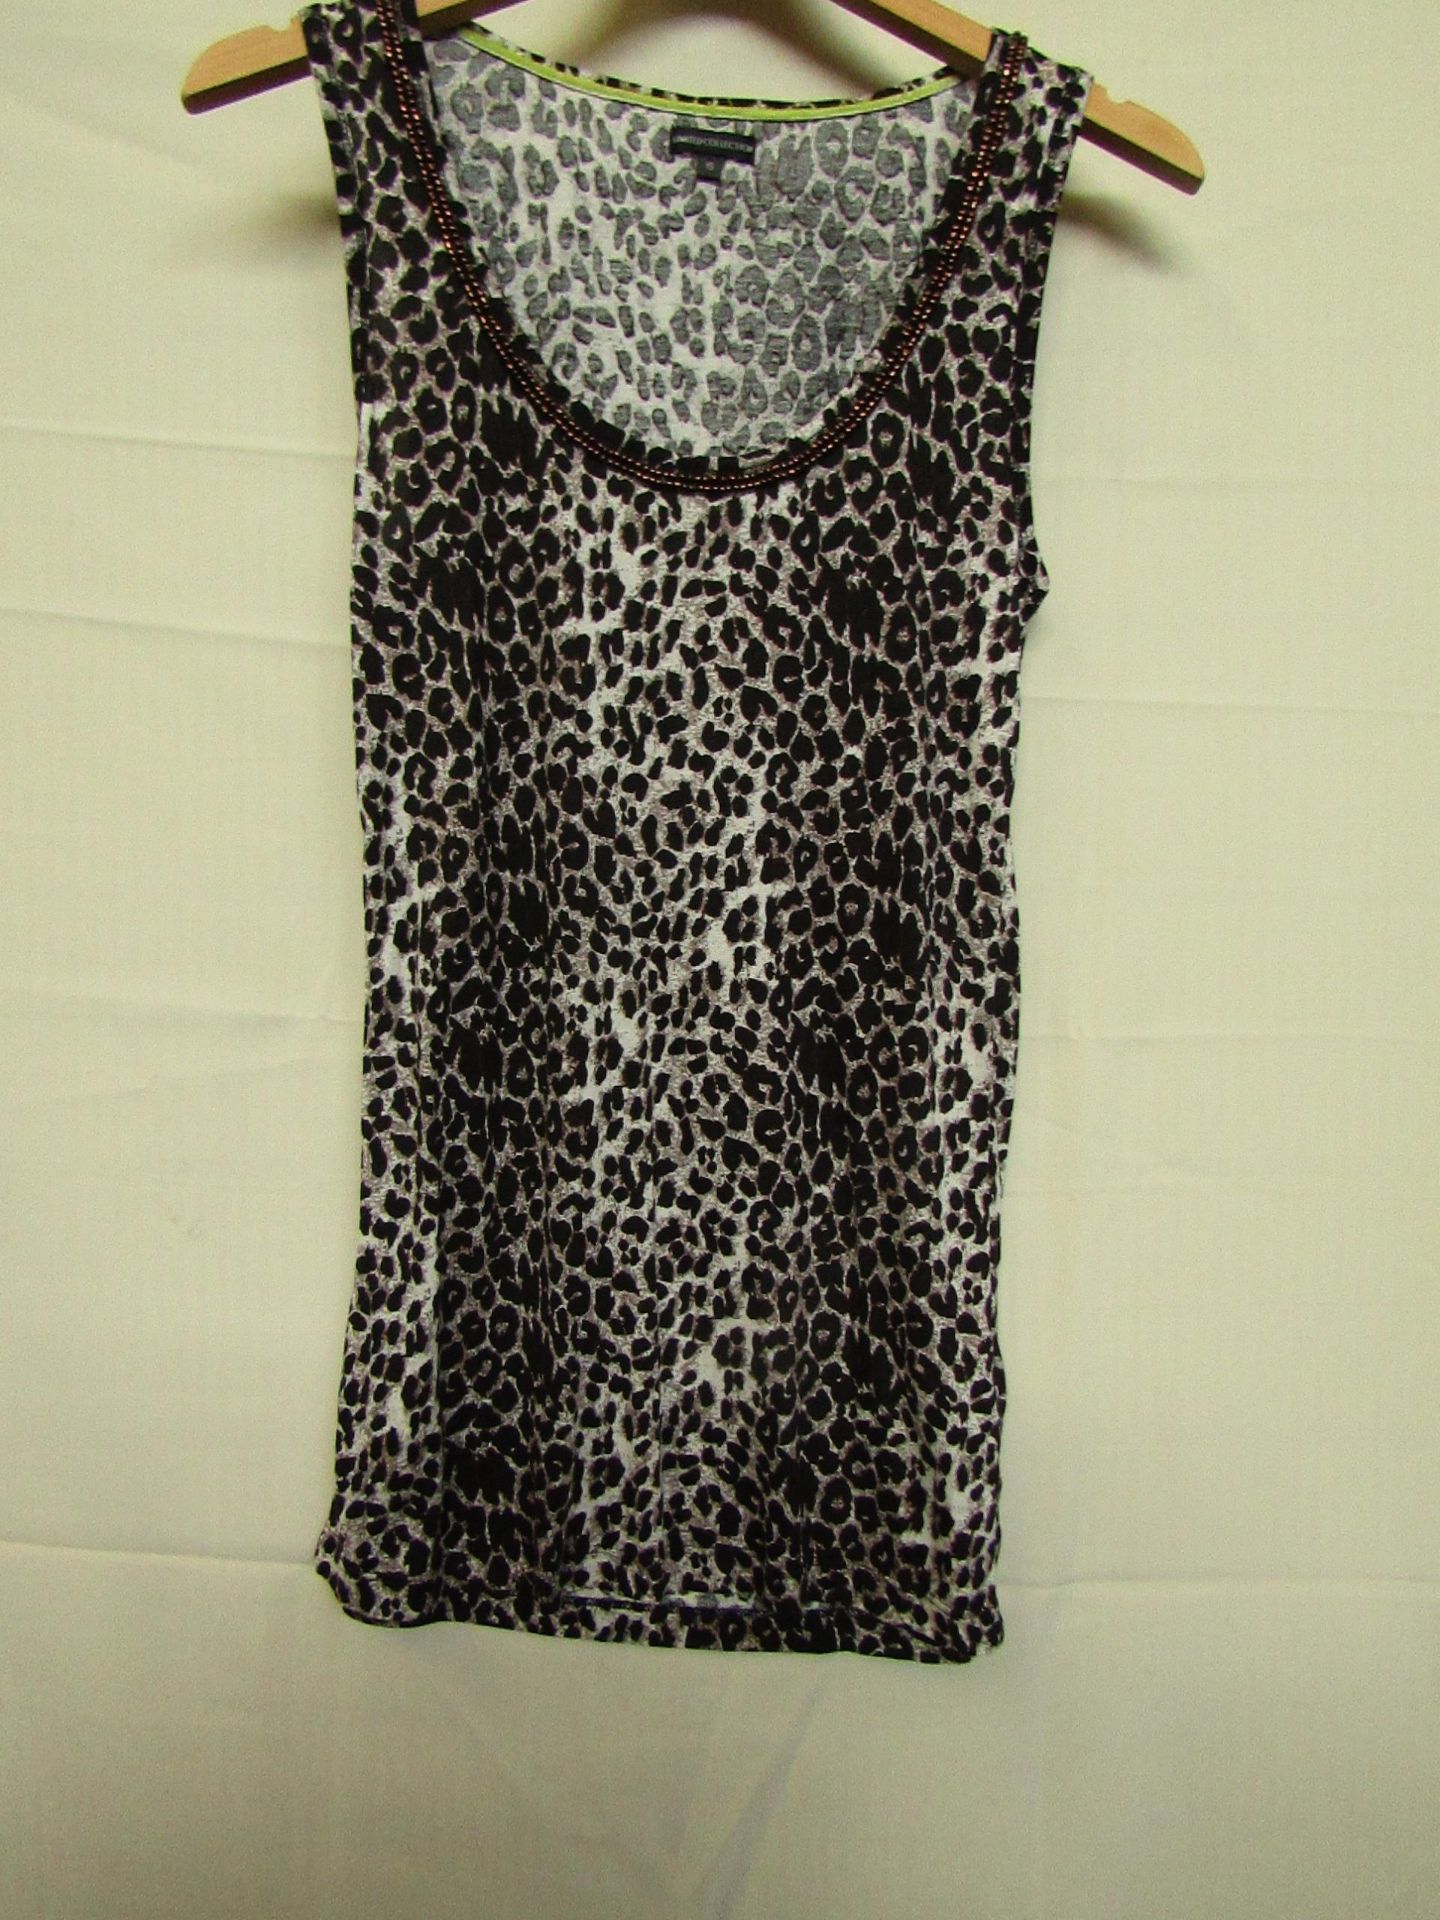 Limited Collection Animal Print Top Size 10 No Tags